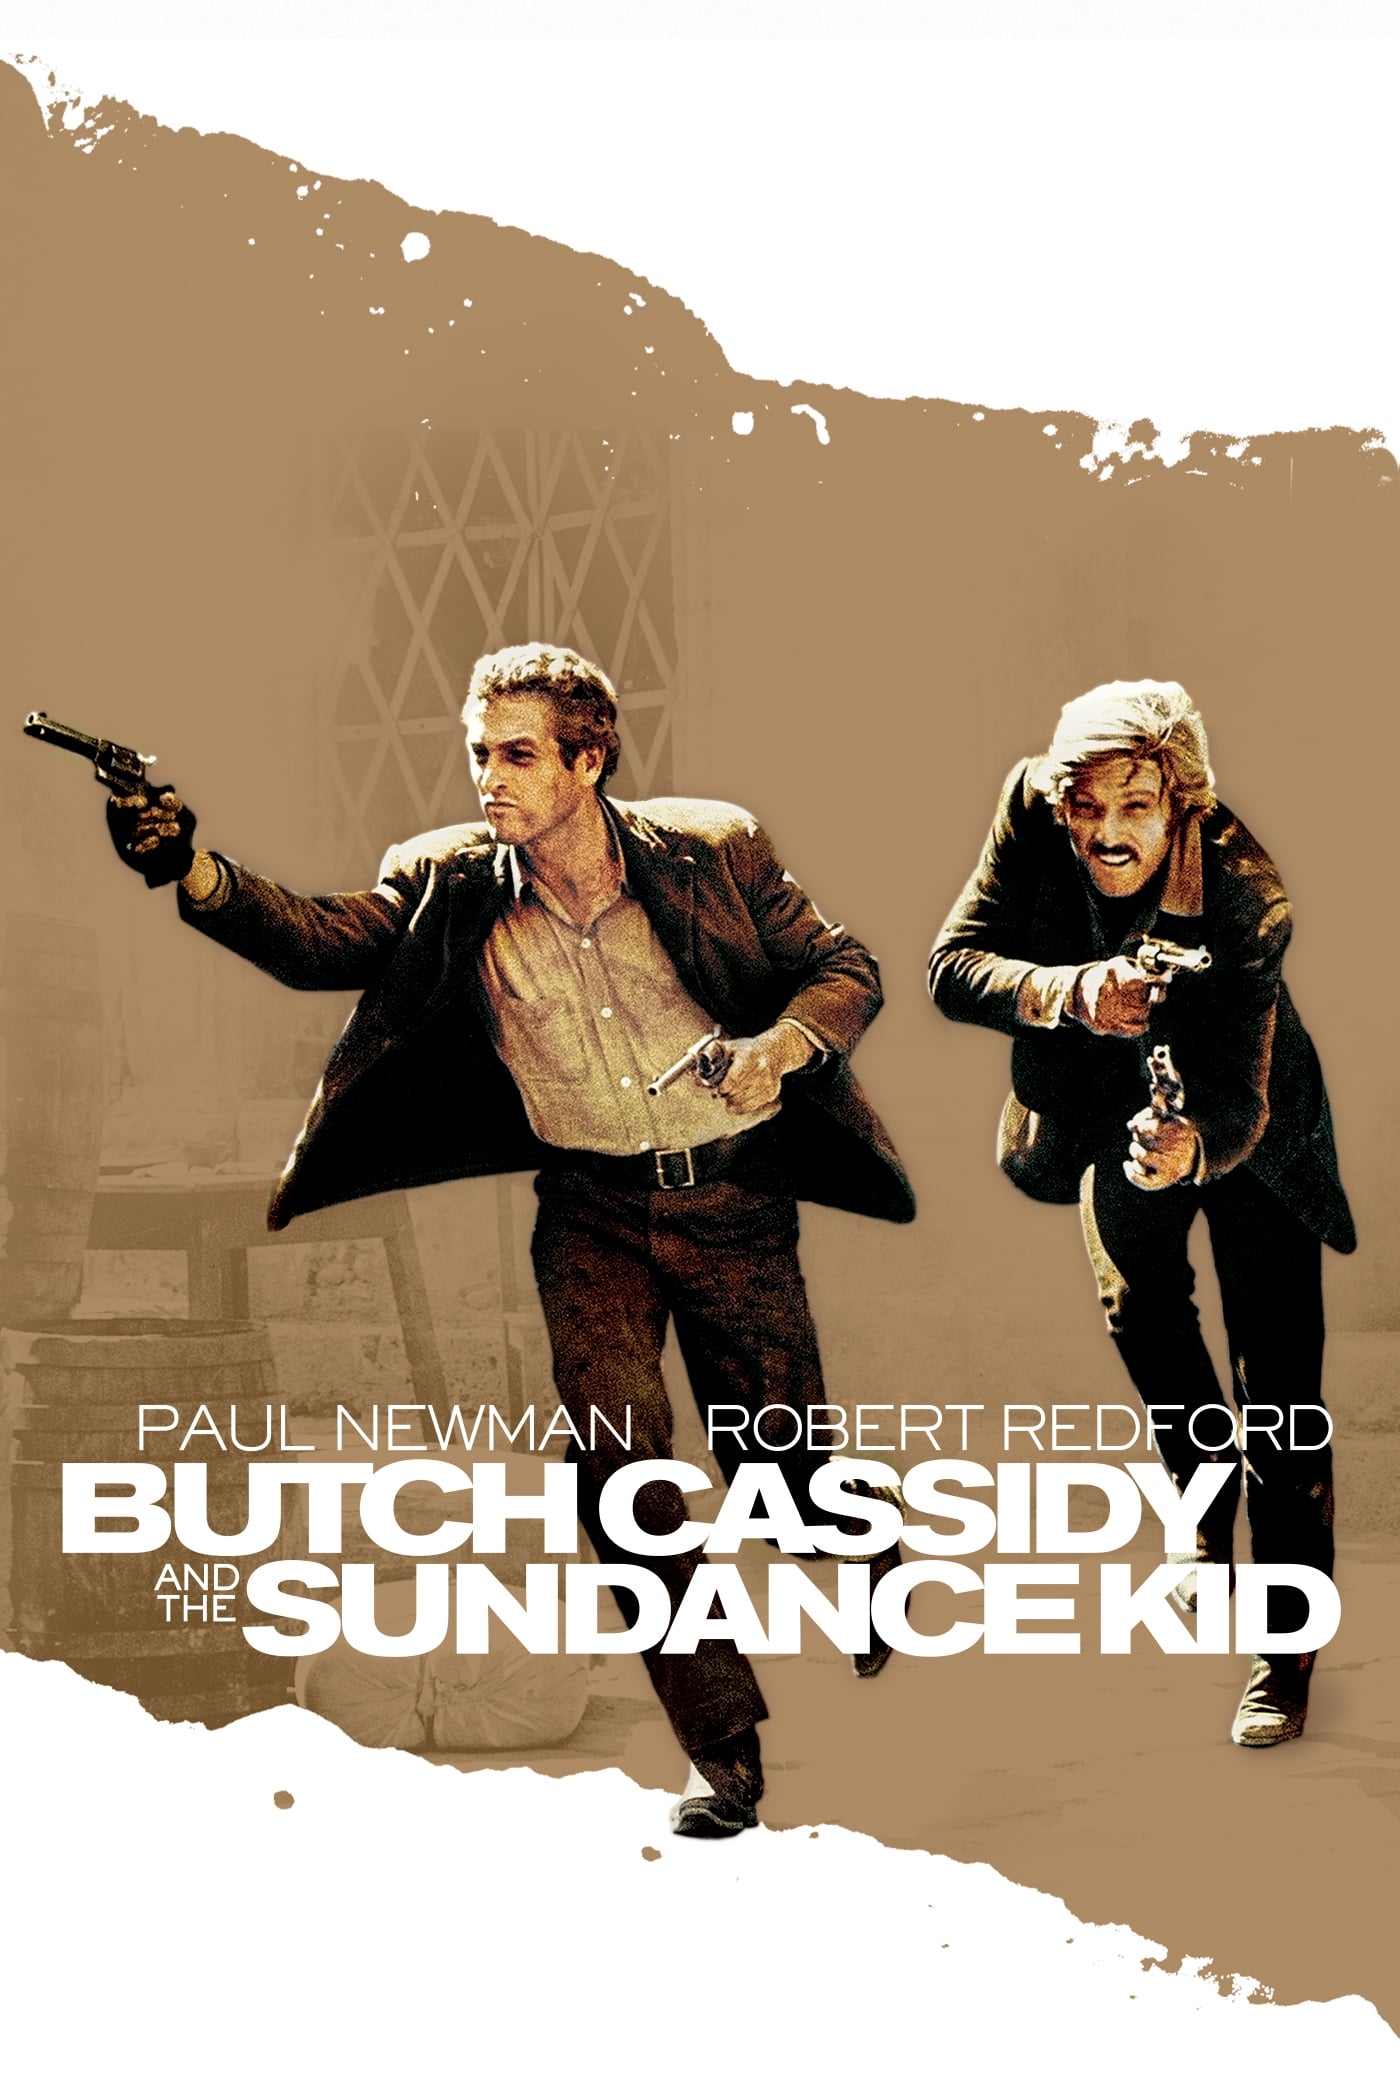 Download Butch Cassidy and the Sundance Kid (1969) {English Audio With Subtitles} 480p [400MB] || 720p [900MB] || 1080p [1.51GB]